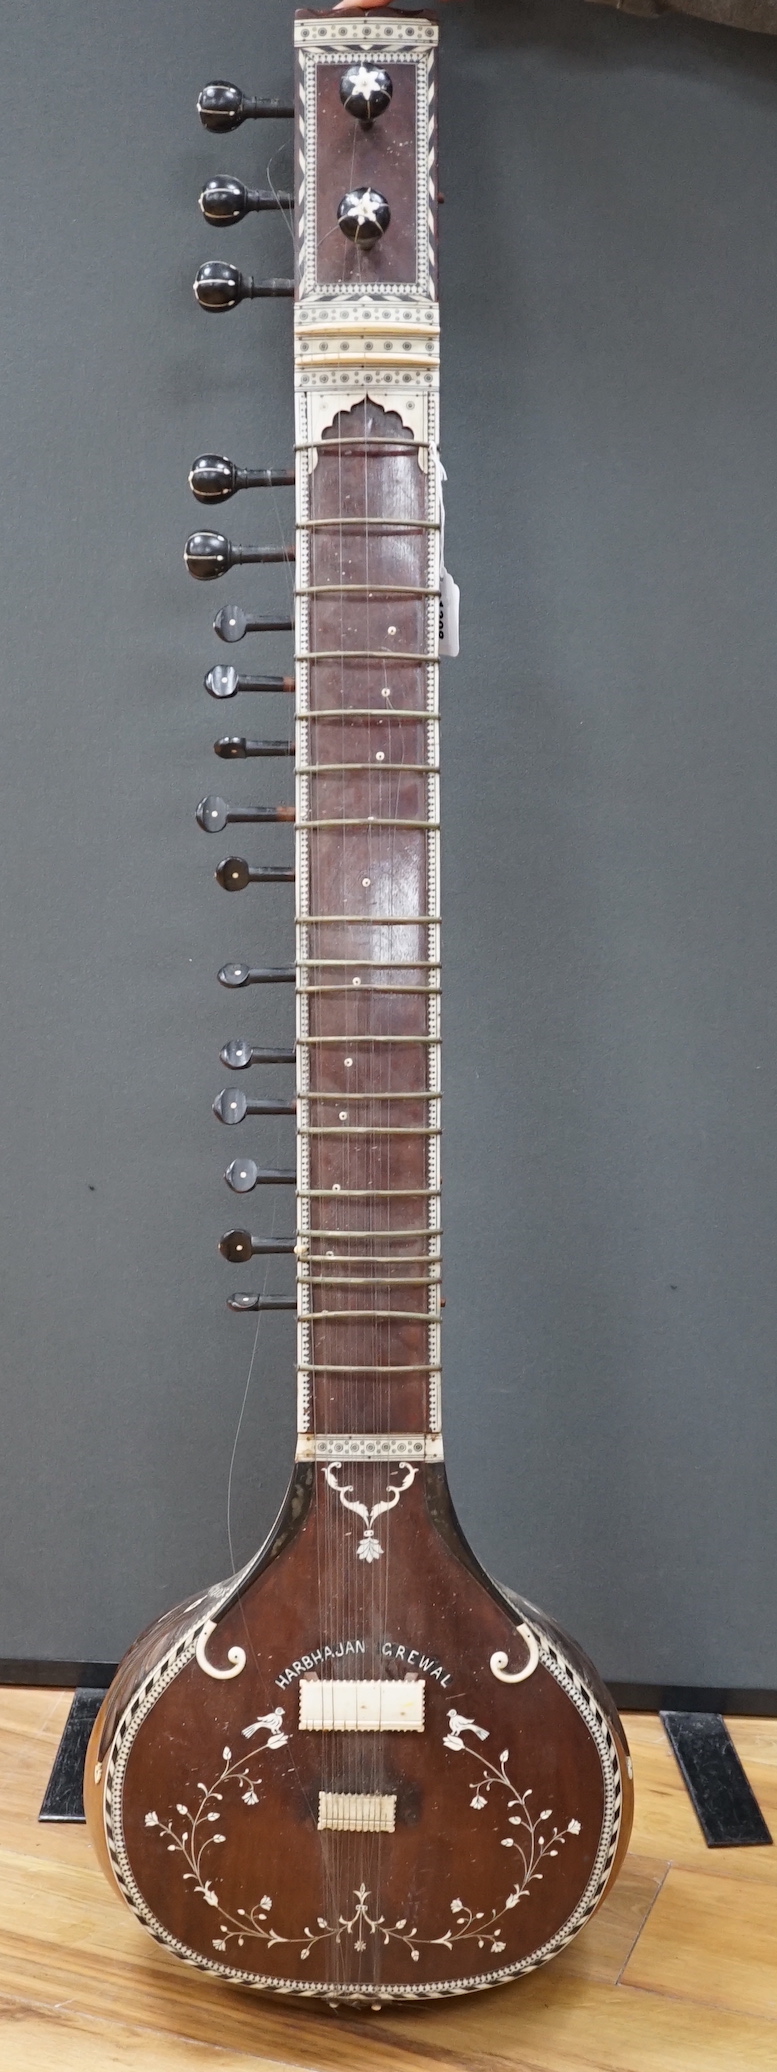 An Indian sitar, with ivory bridge and decoration, inlaid with ‘Harbhajan Grewal’ overall length